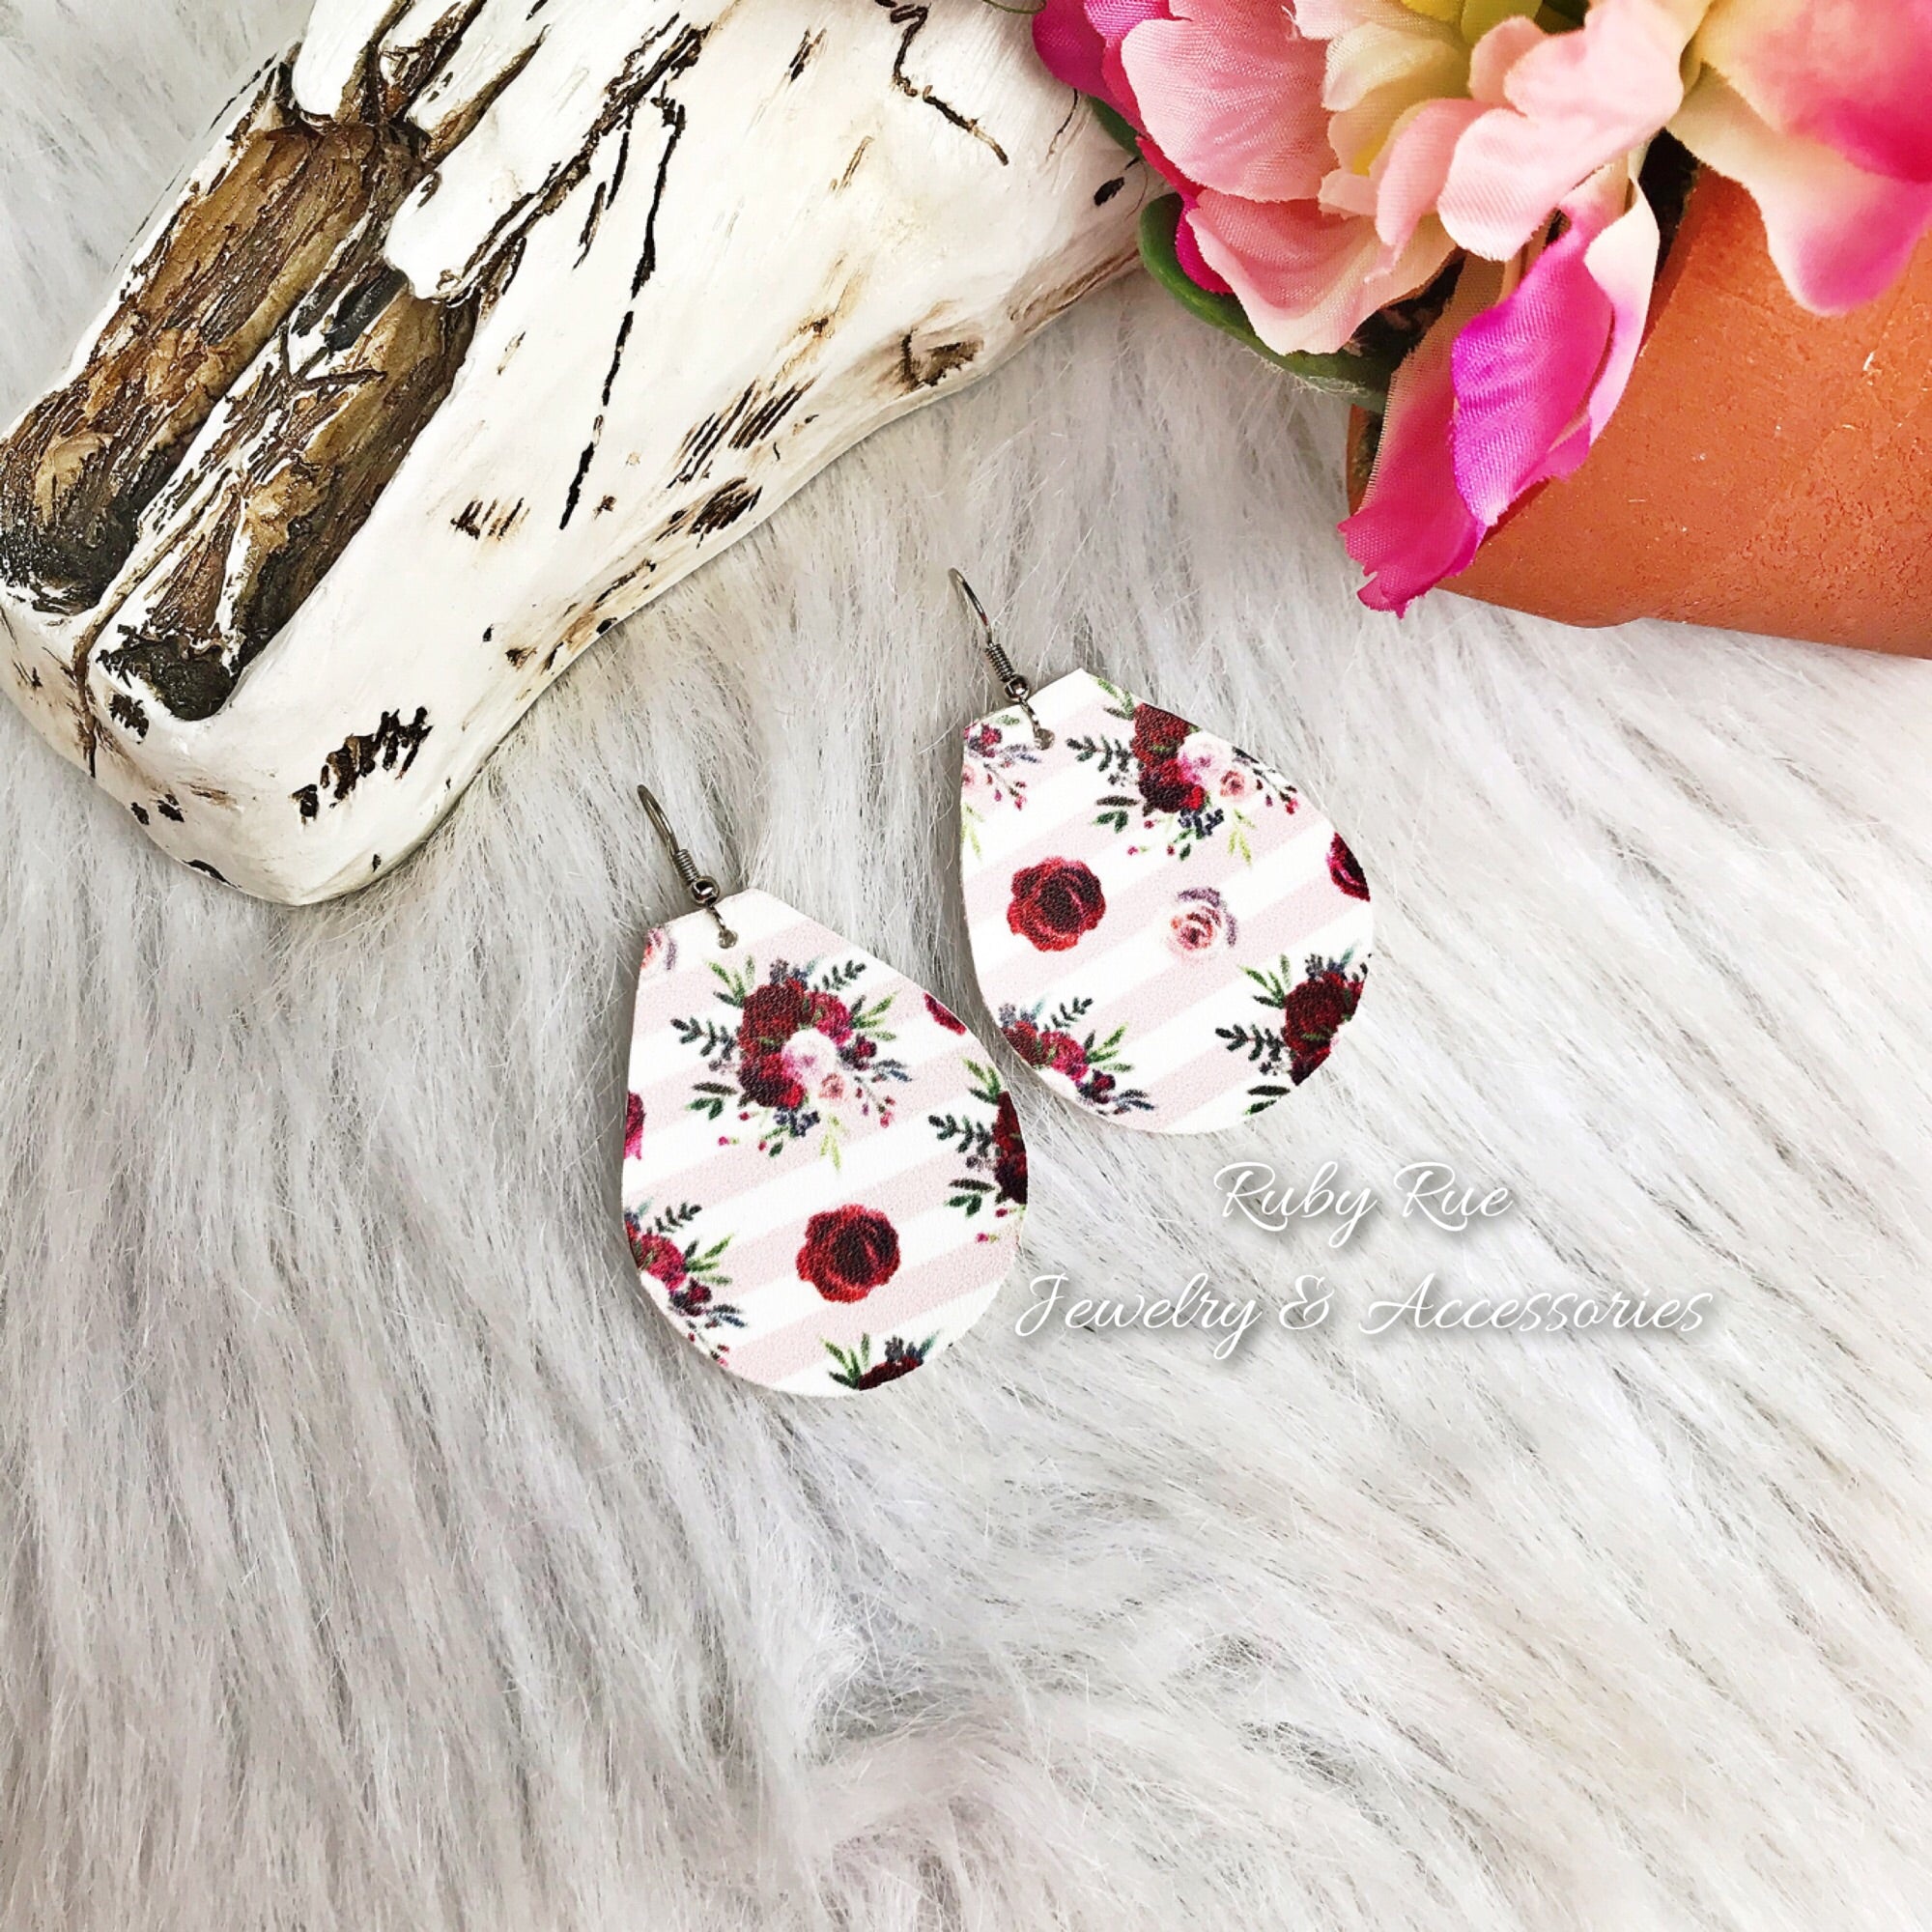 Plum & Pink Floral Leather Earrings - Ruby Rue Jewelry & Accessories